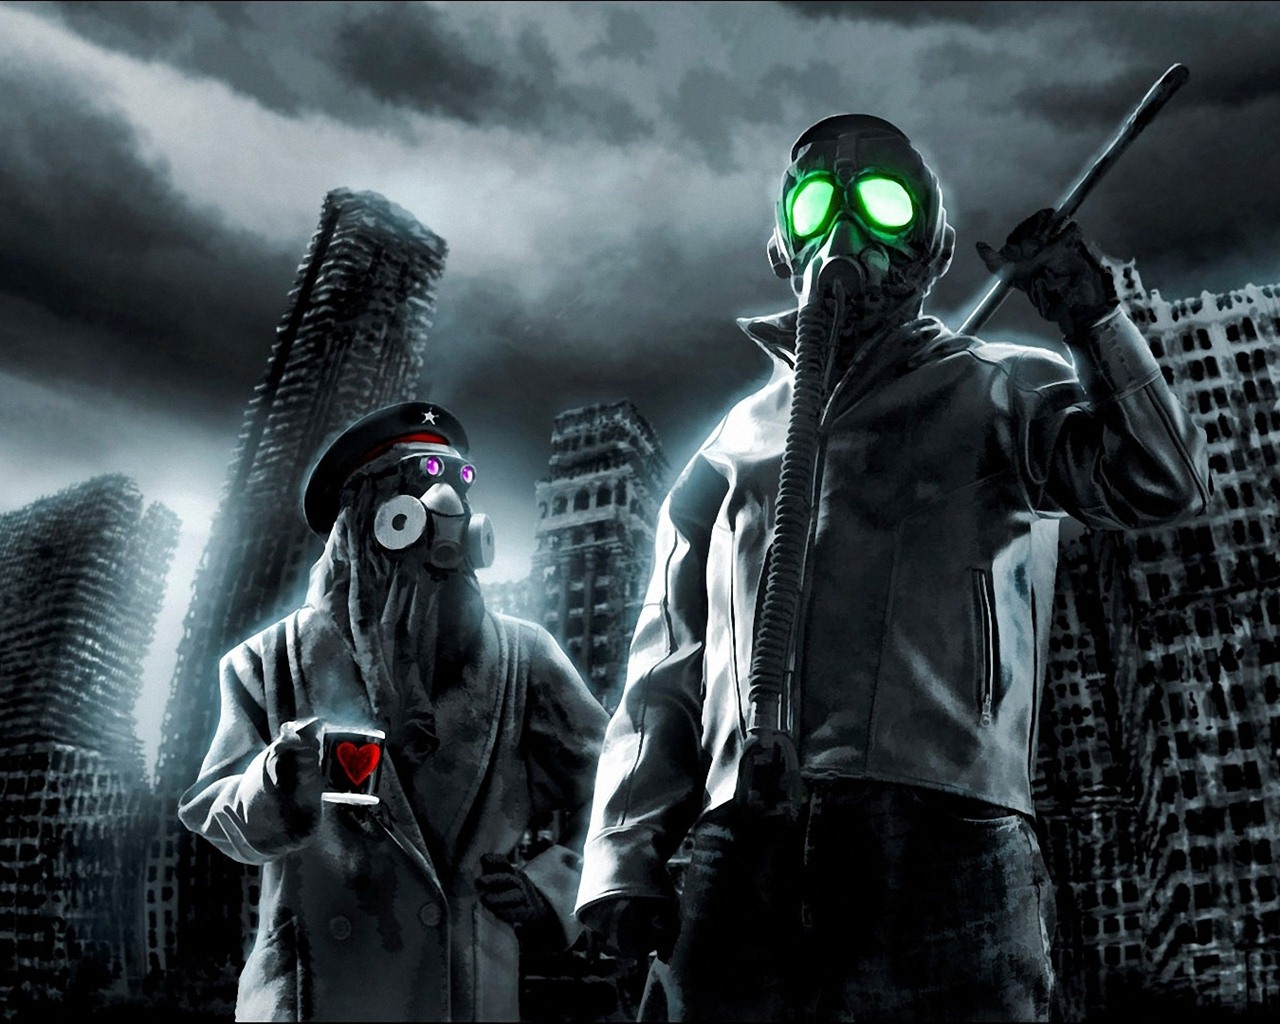 Romantically Apocalyptic creative painting wallpapers (1) #16 - 1280x1024